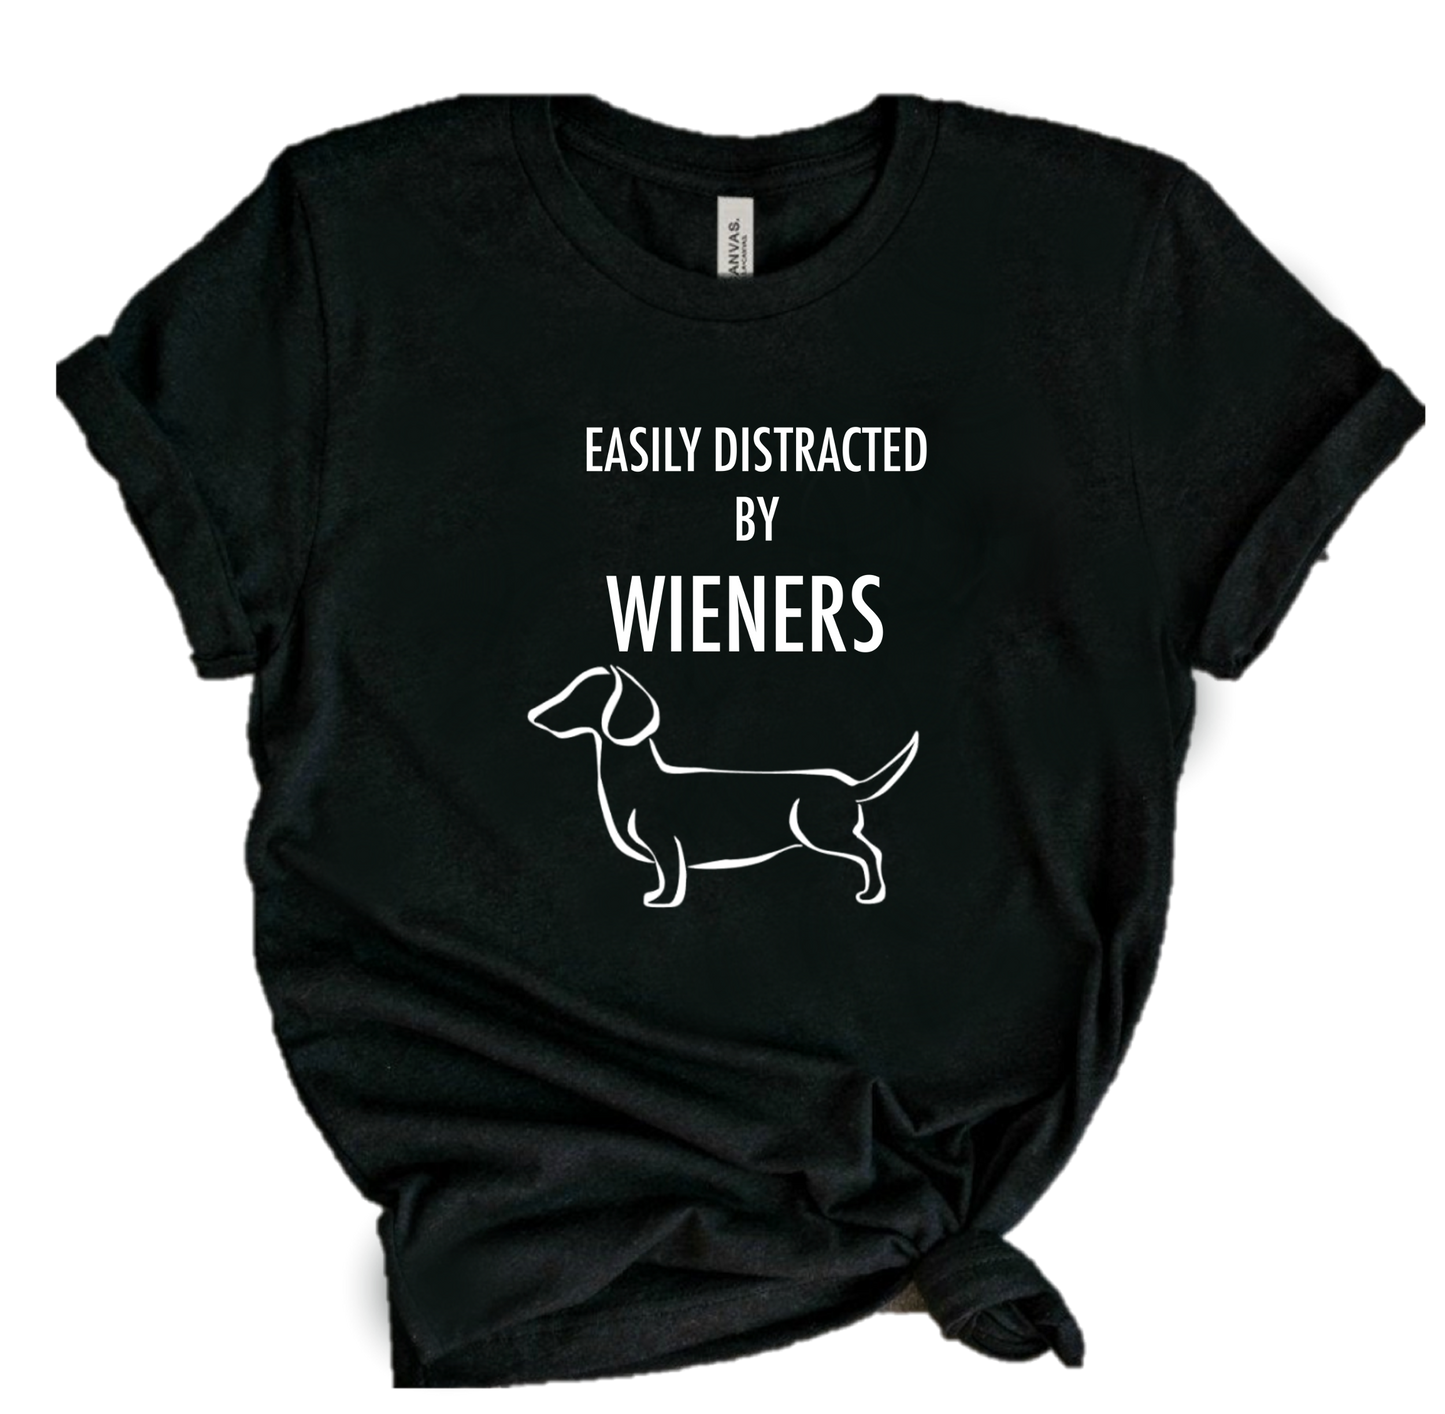 EASILY DISTRACTED BY WIENERS